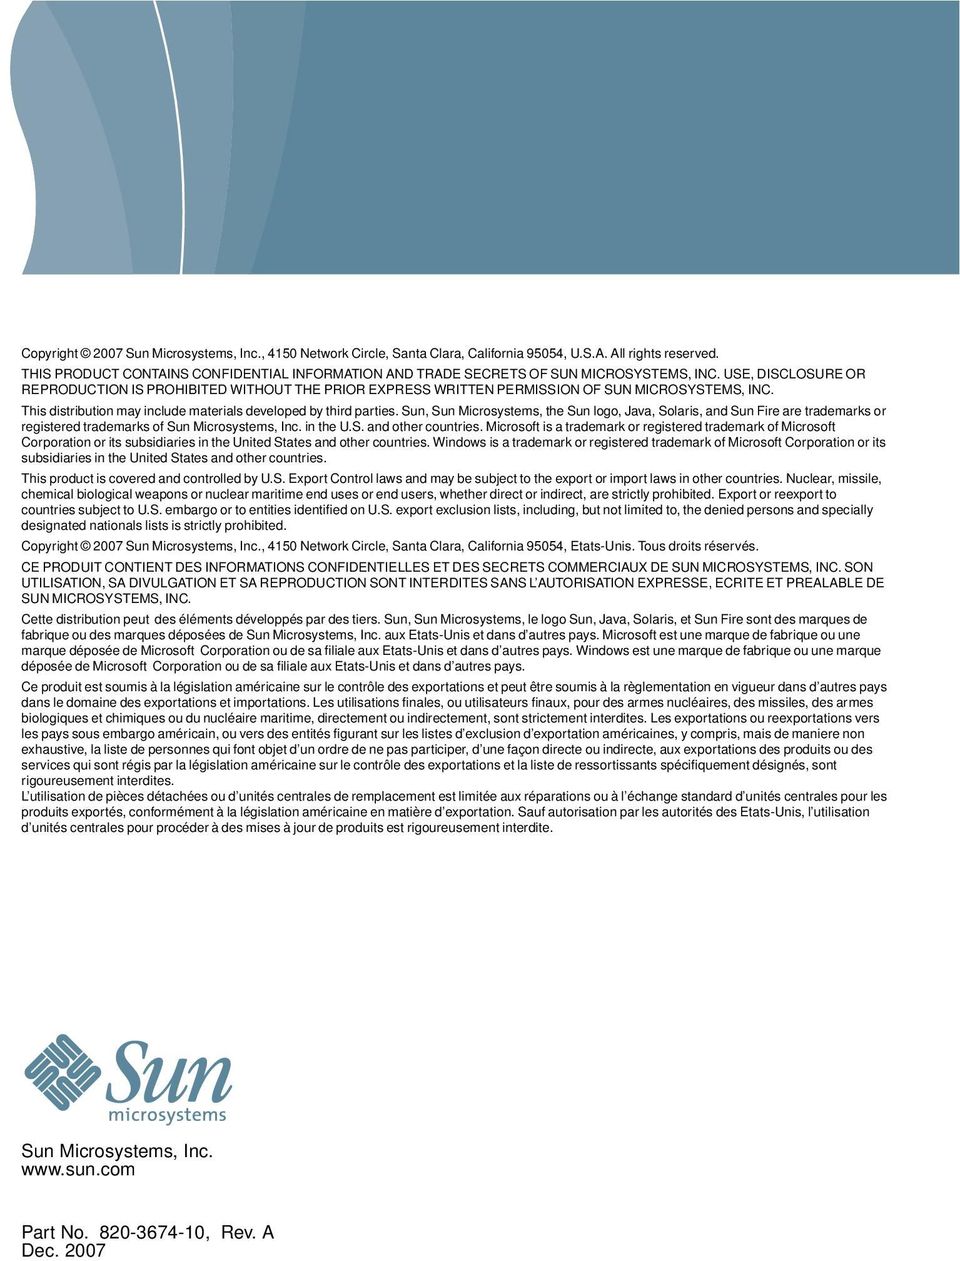 USE, DISCLOSURE OR REPRODUCTION IS PROHIBITED WITHOUT THE PRIOR EXPRESS WRITTEN PERMISSION OF SUN MICROSYSTEMS, INC. This distribution may include materials developed by third parties.